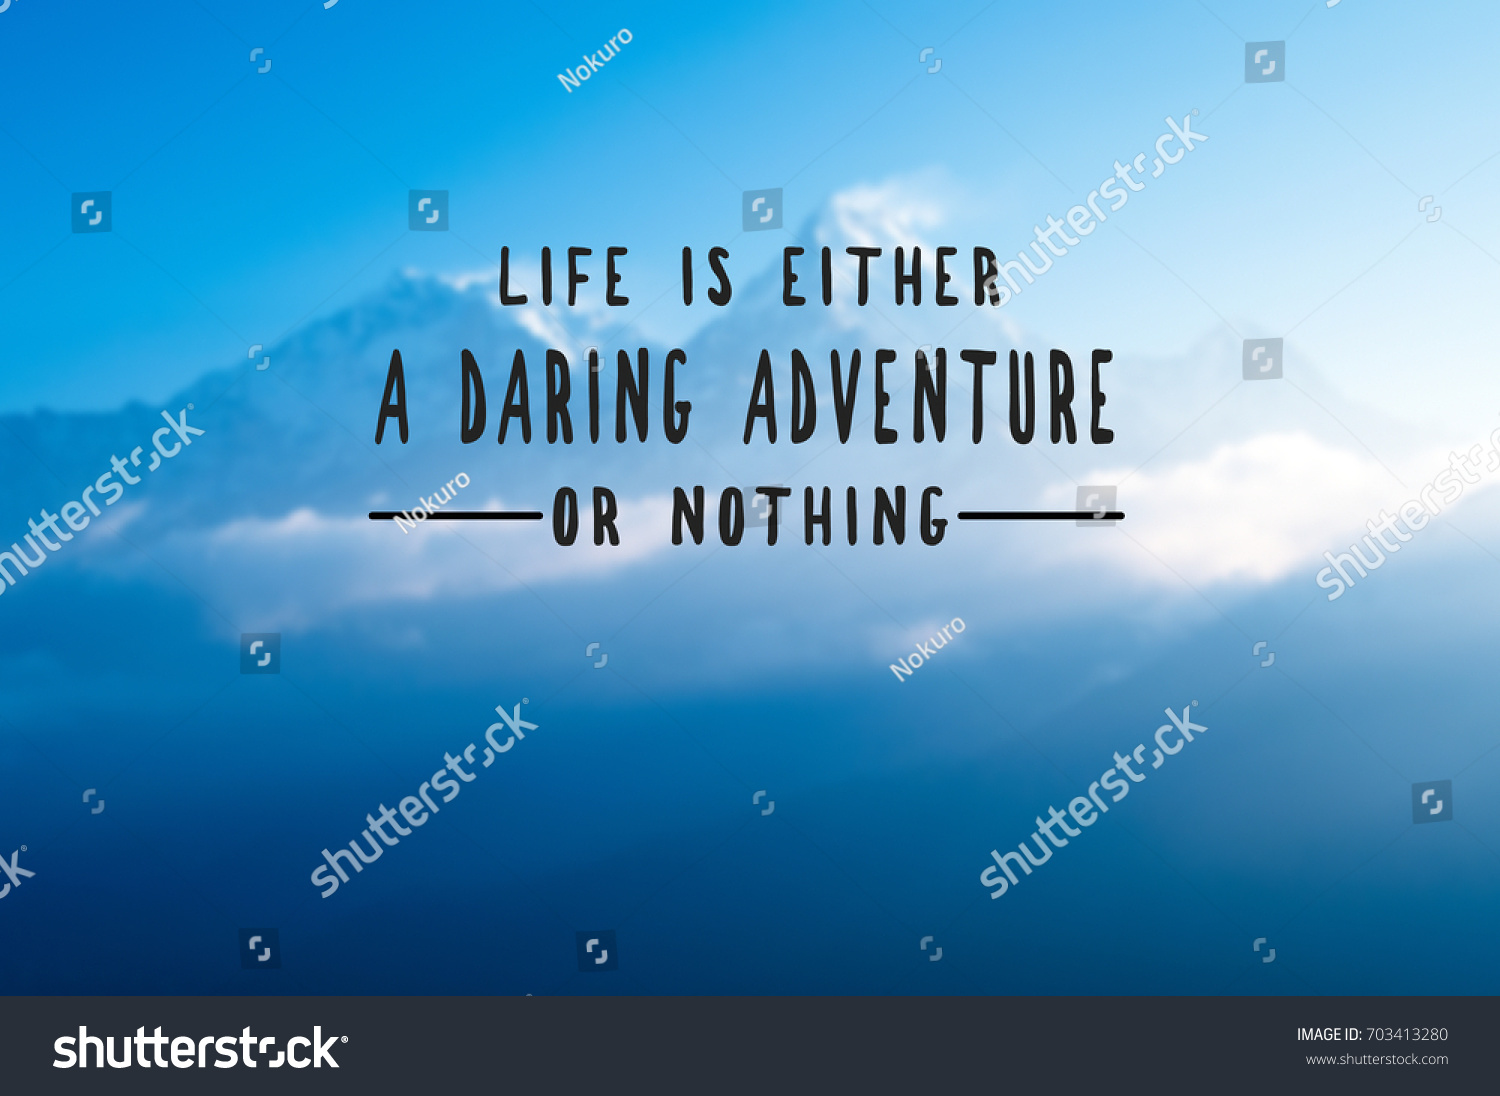 Inspirational Quotes Life Either Daring Adventure Stock Photo